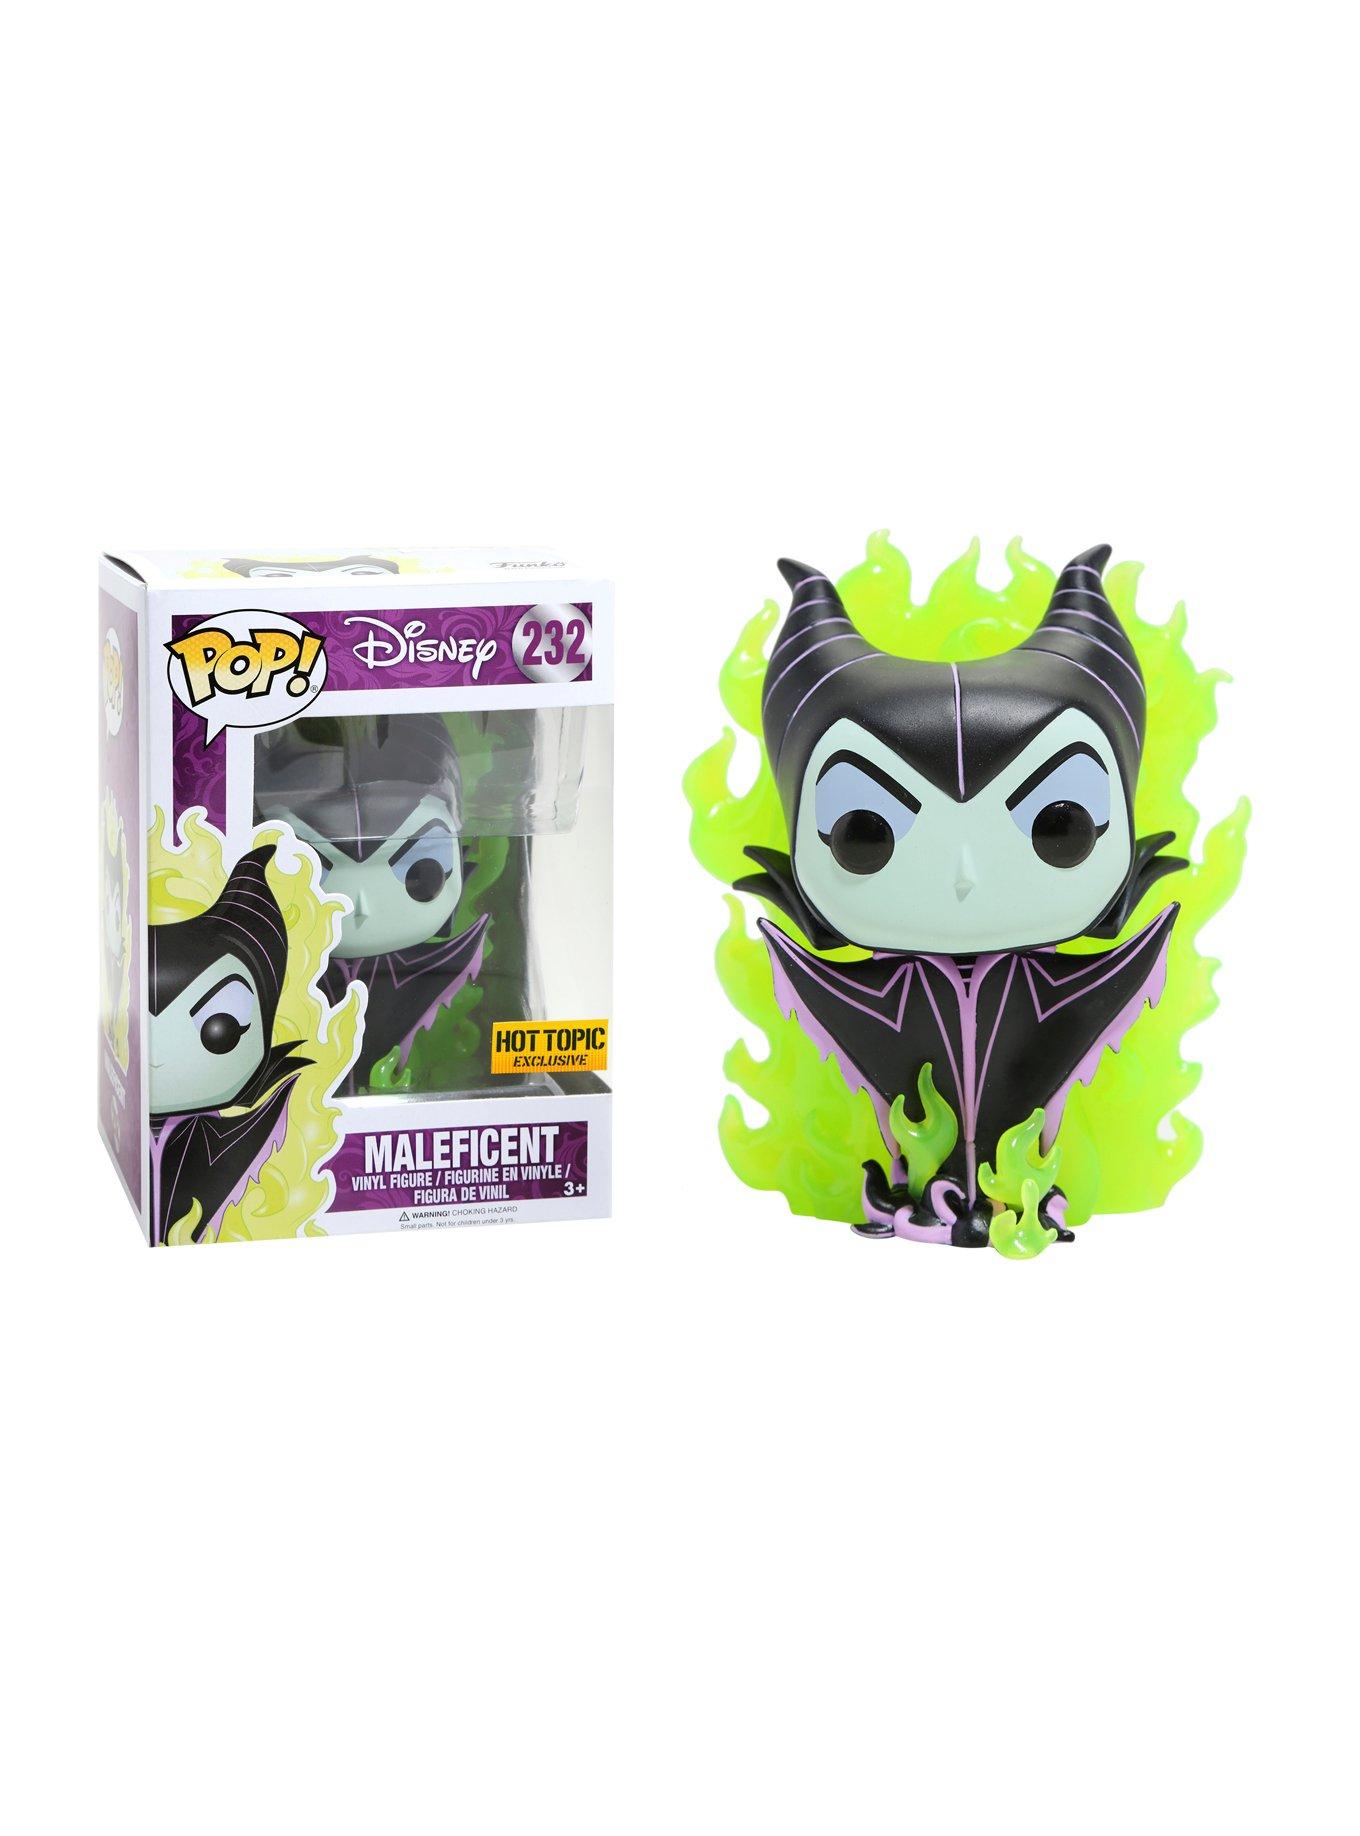 Funko Soda Disney Sleeping Beauty Maleficent Limited Edition (Int Version)  - Chance of CHASE Variant!